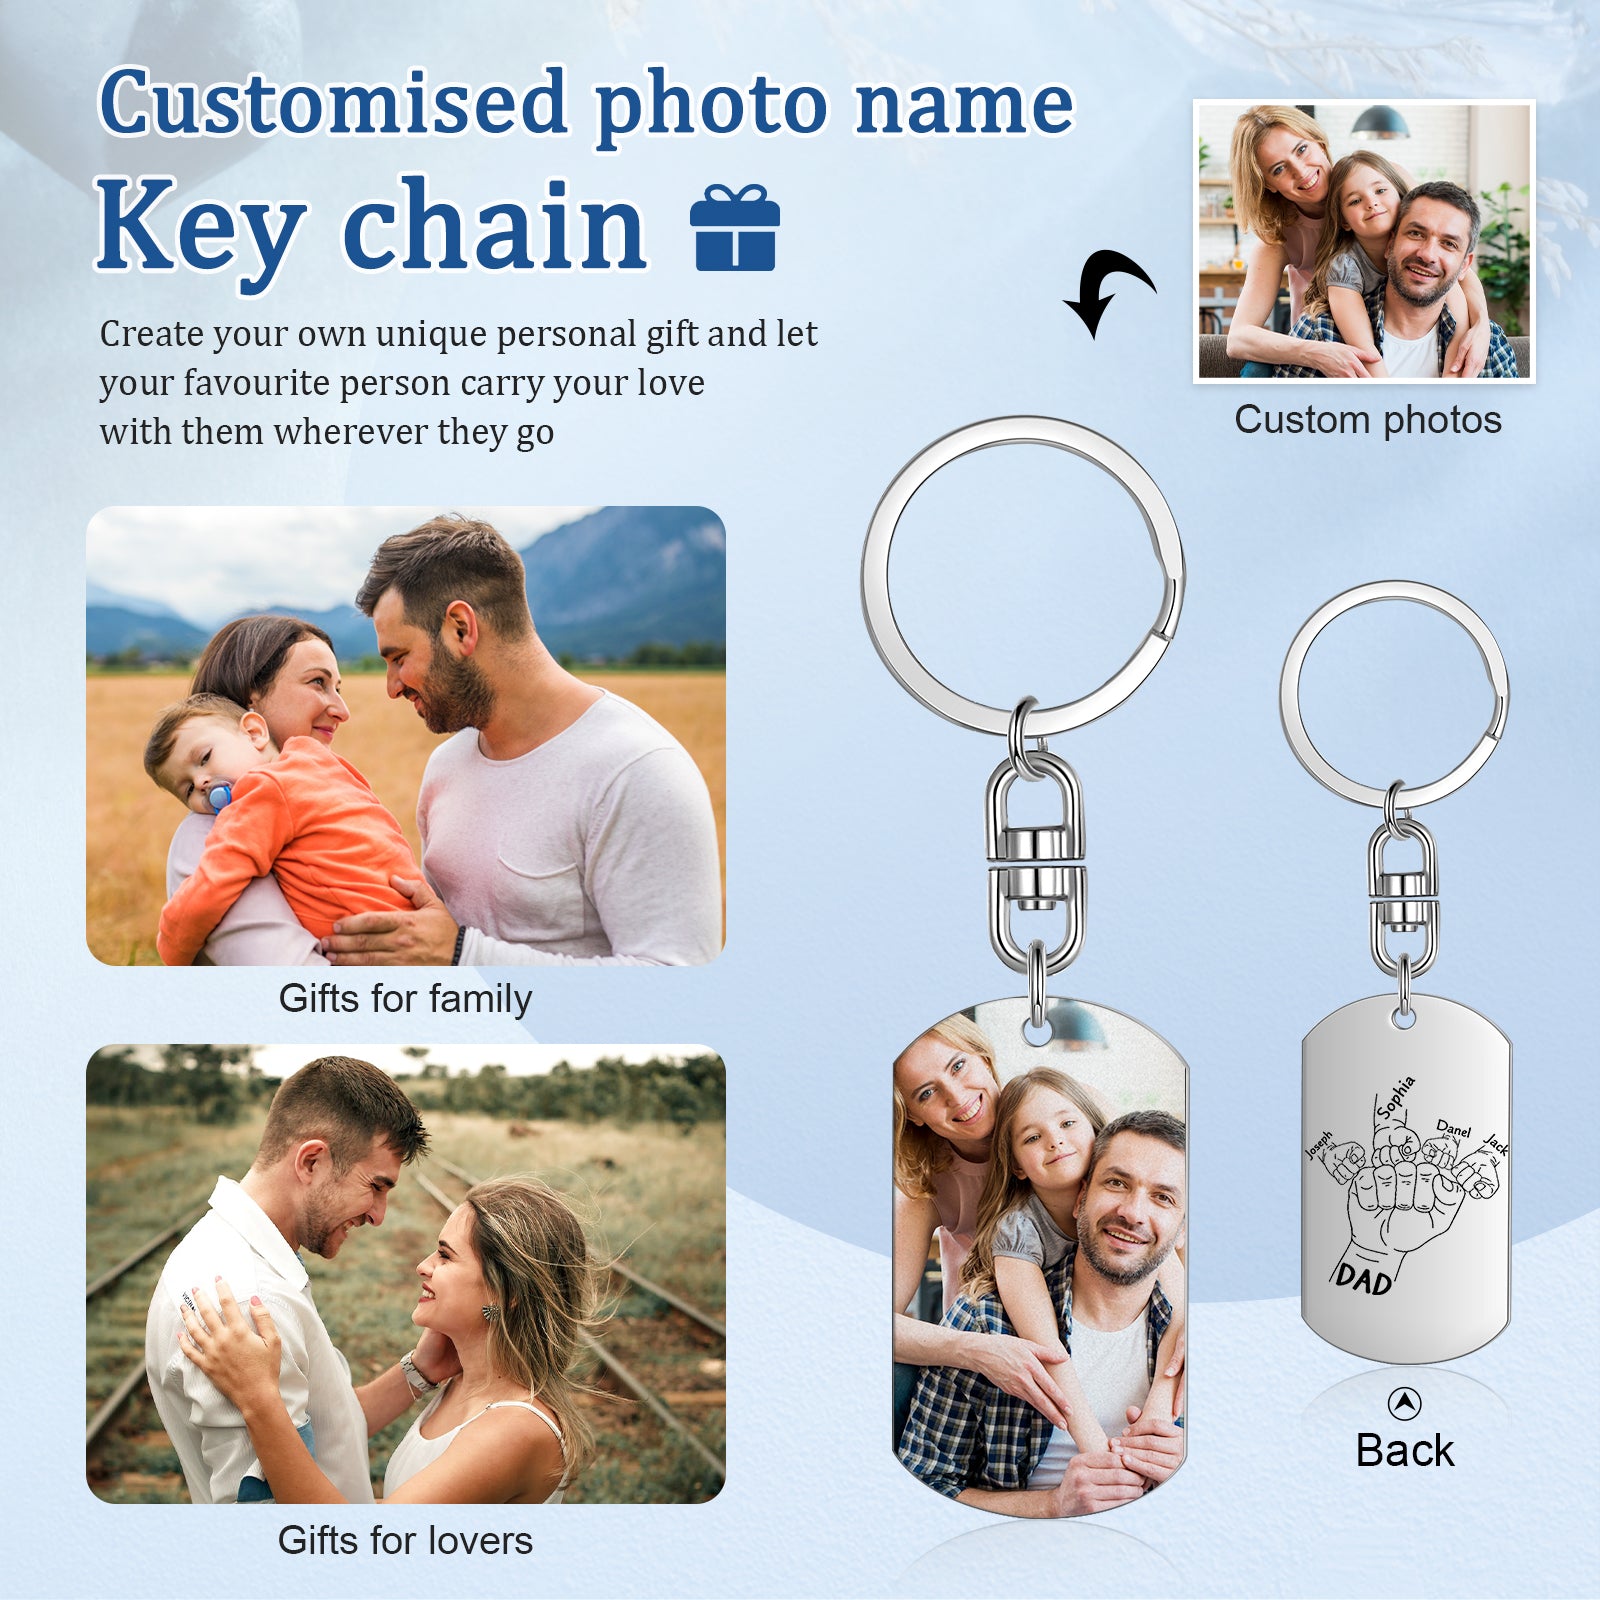 Dad Fist Bump Custom Photo, Made to Order, Personalized Key Chain Add up to 4 Names